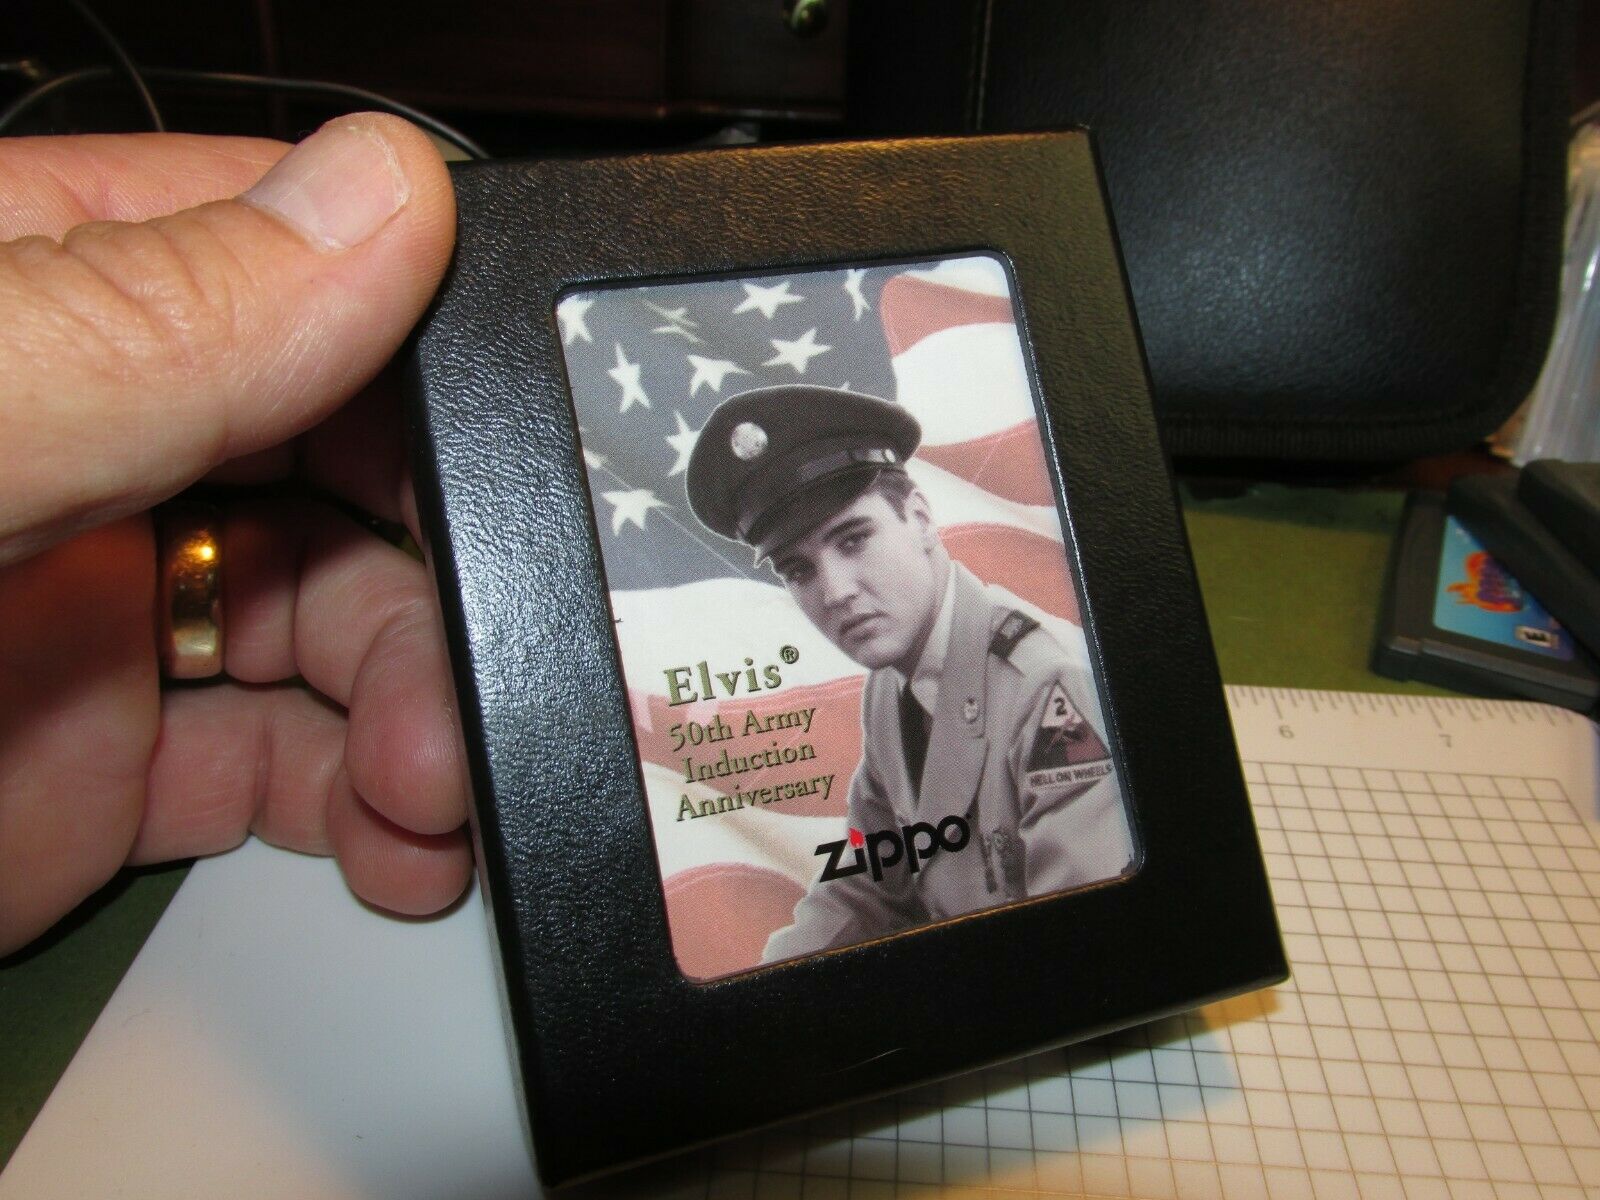 Limited Edition Elvis Presley Zippo Lighter,50th Anniversary Us Army Induction